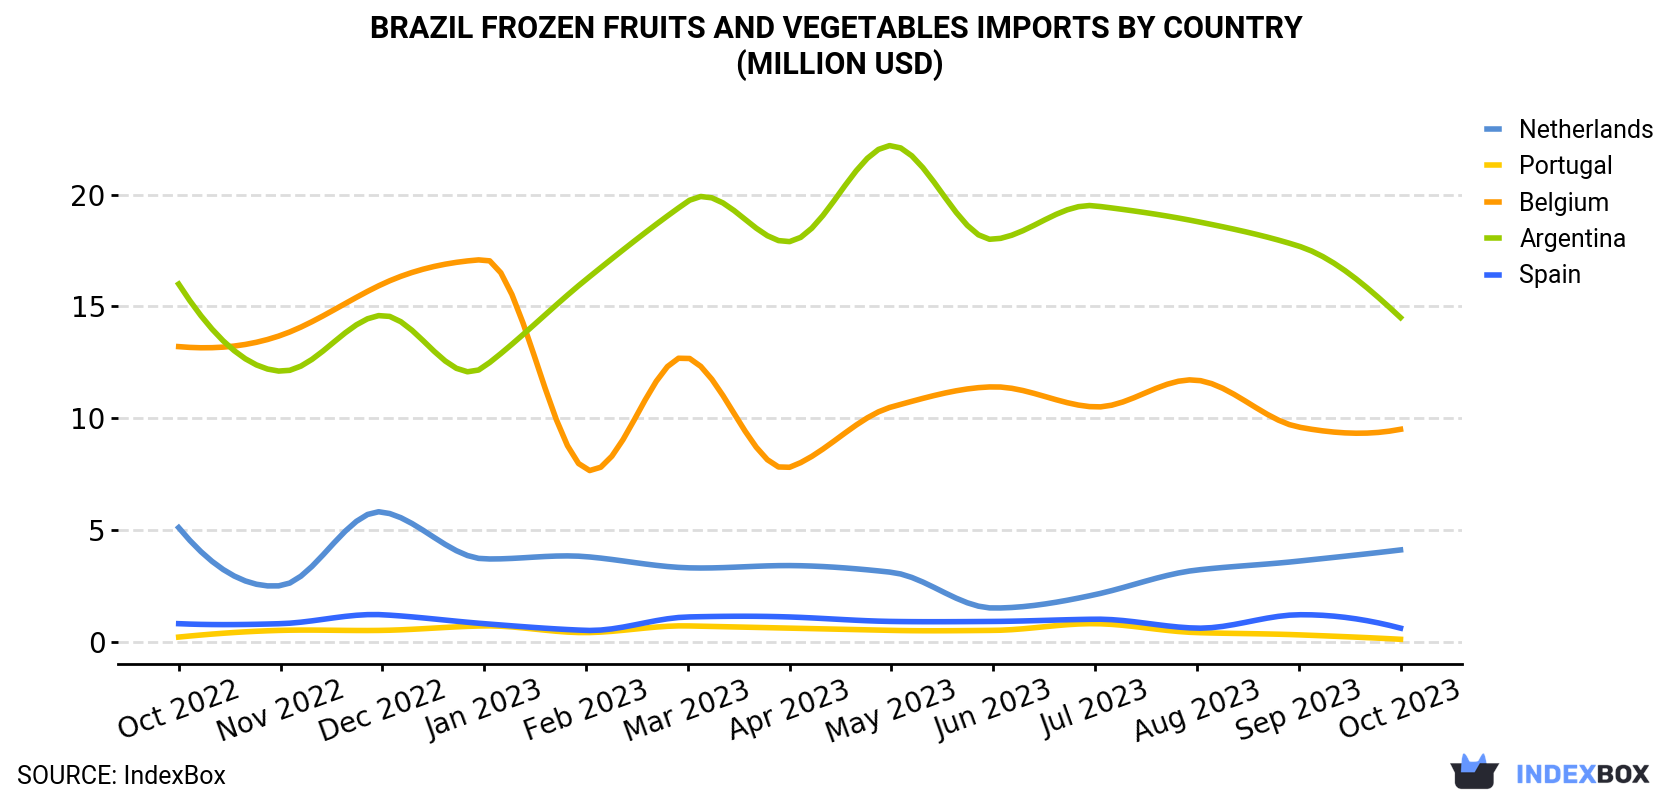 Brazil Frozen Fruits And Vegetables Imports By Country (Million USD)